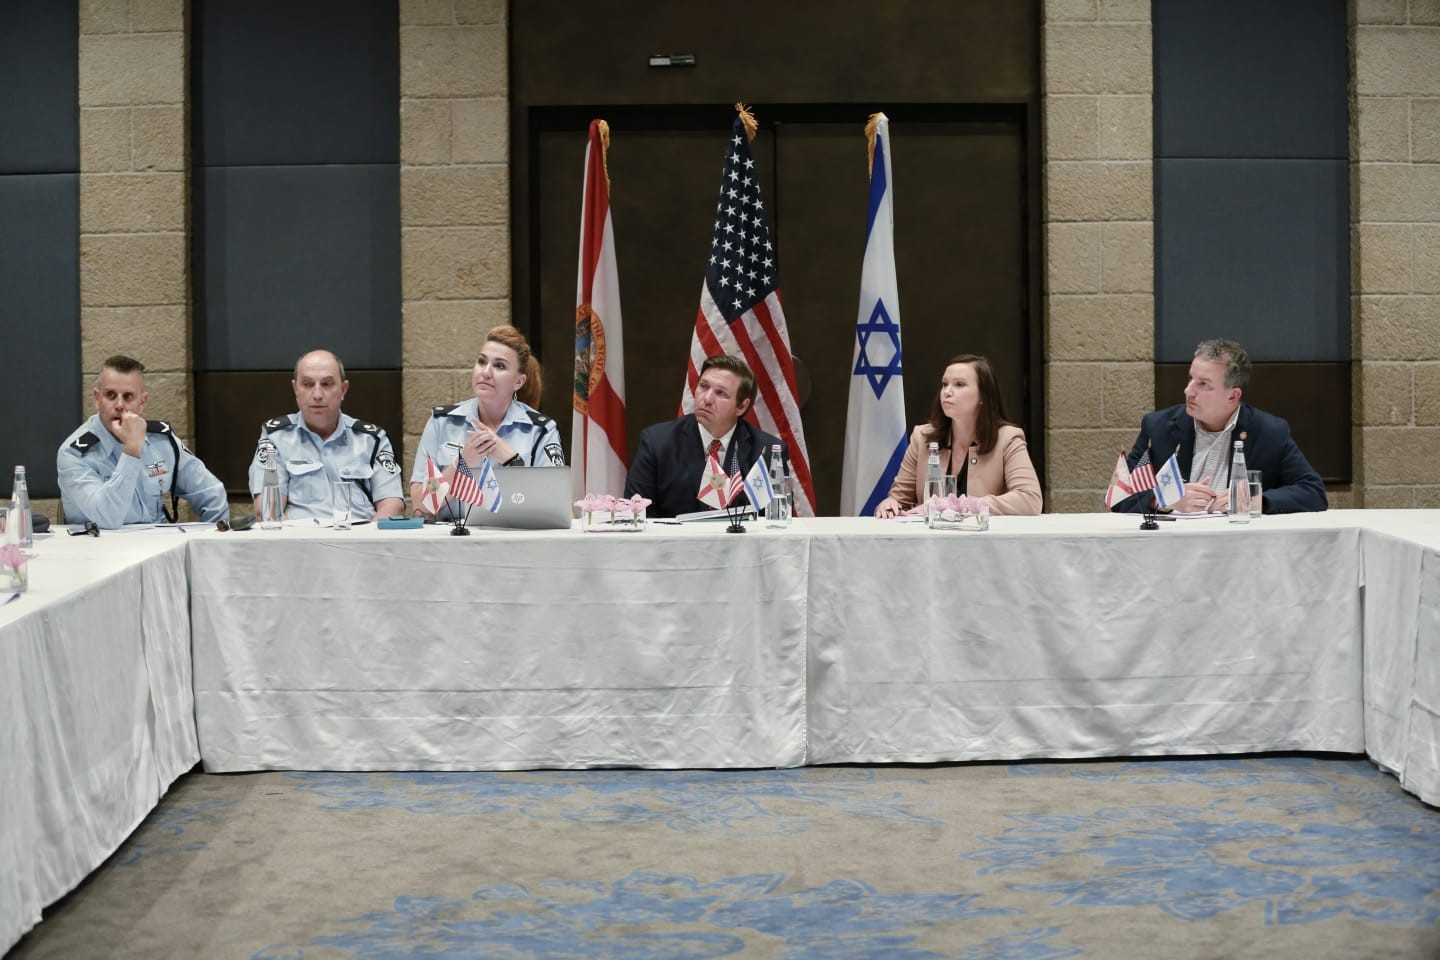   Governor Ron DeSantis Leads Roundtable Discussion on School Safety and Security in Jerusalem